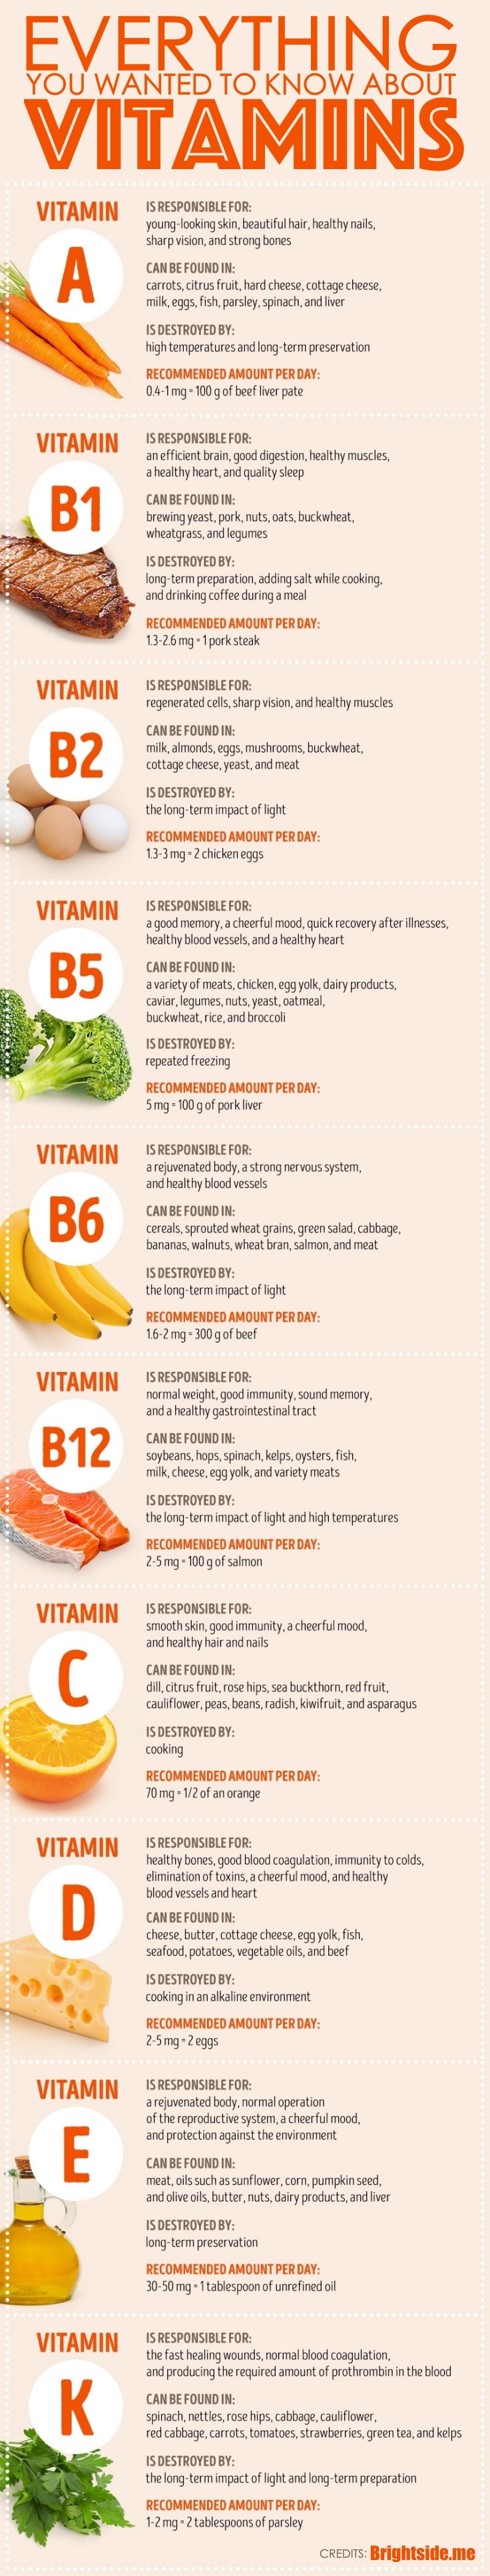 All About Vitamins